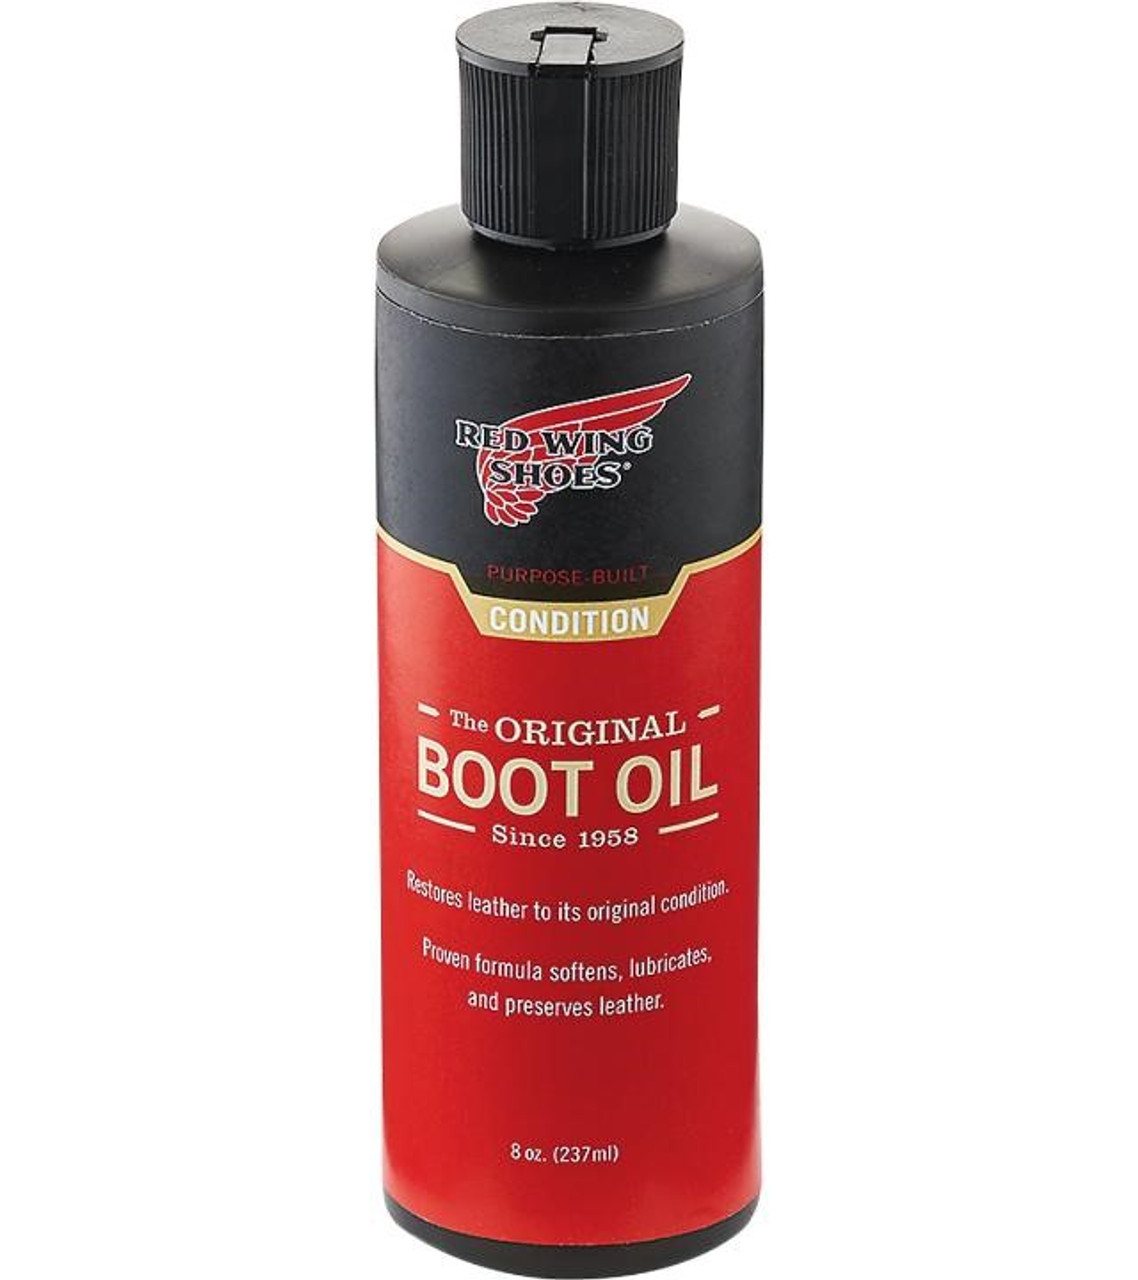 red wing all natural boot paste